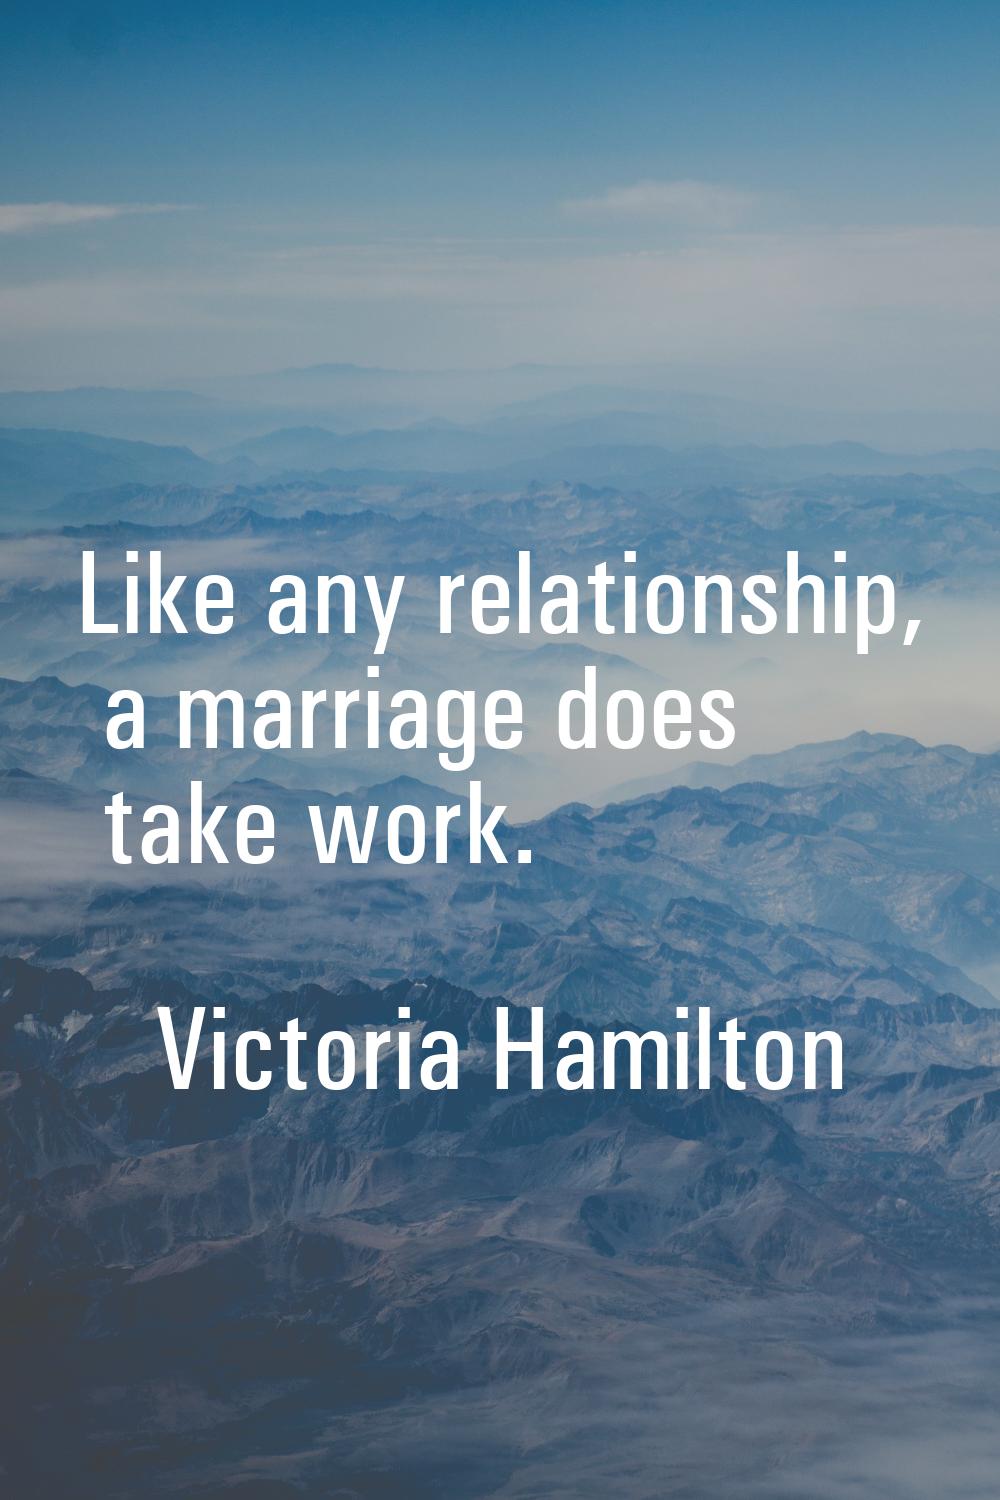 Like any relationship, a marriage does take work.